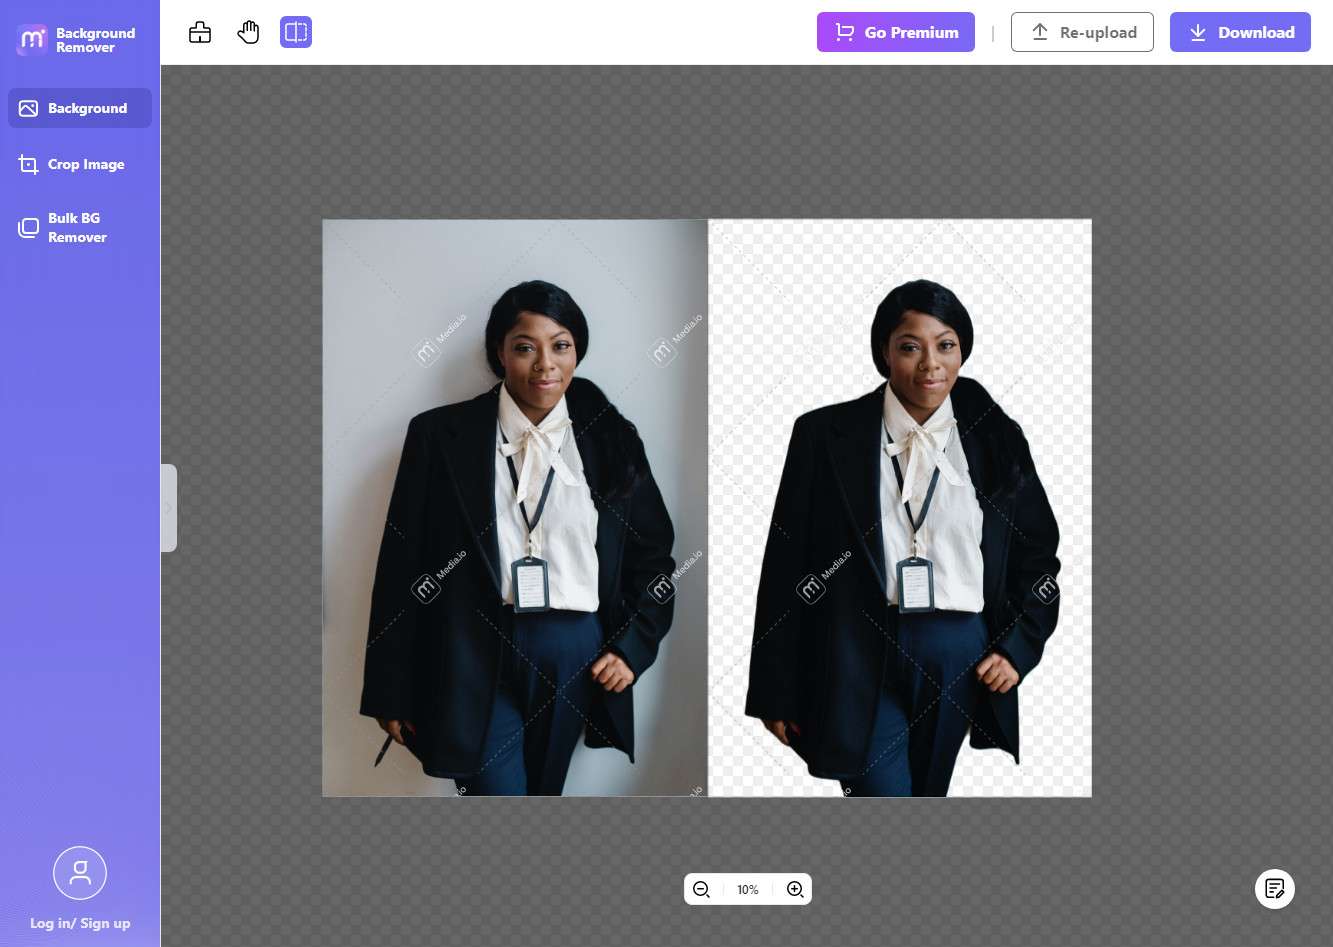 preview images in media.io image background remover